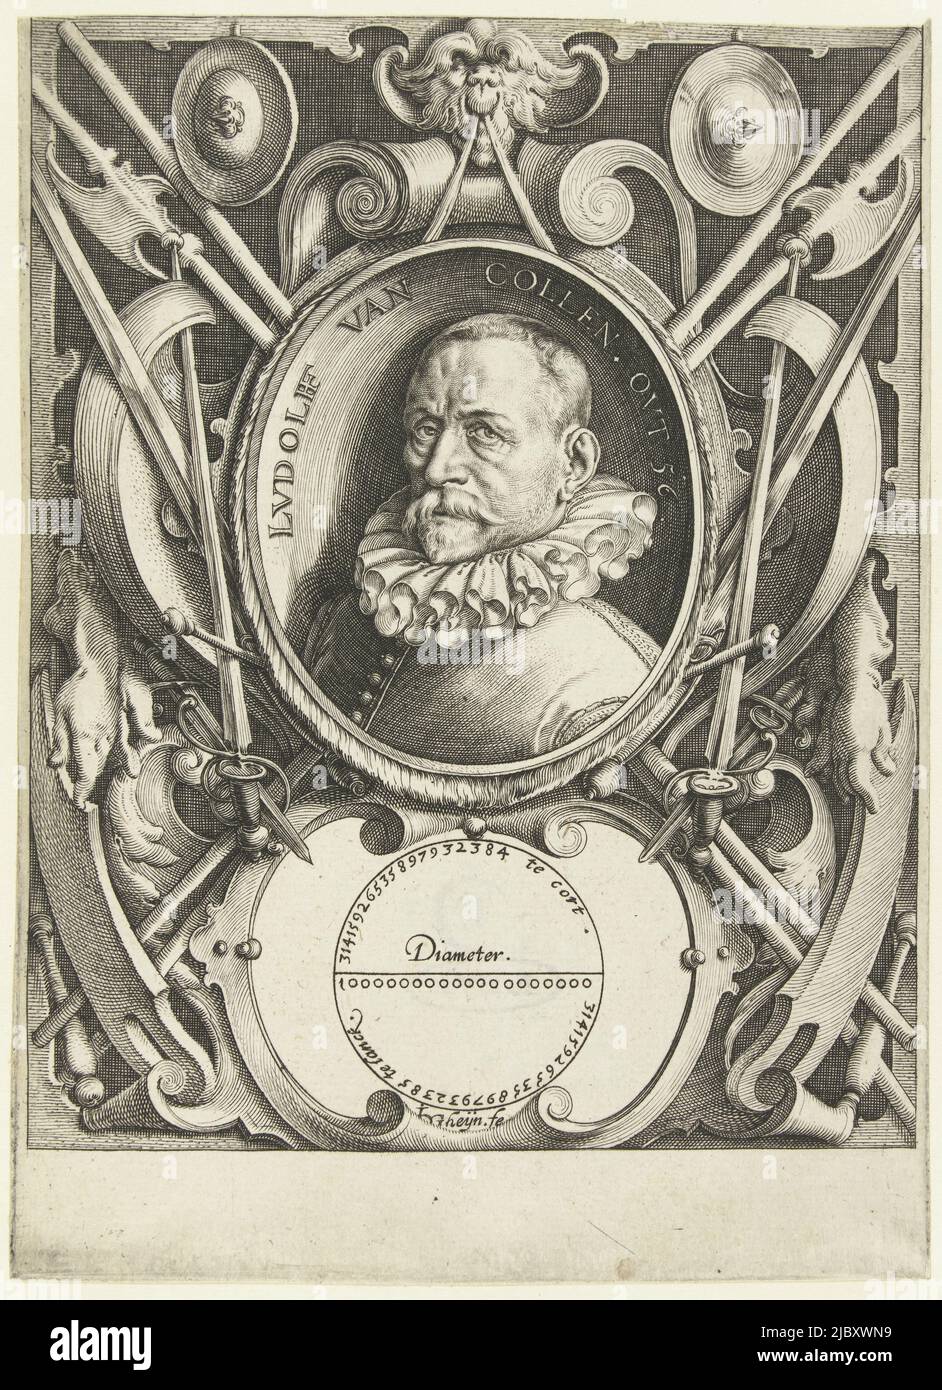 Bust of Ludolf van Ceulen (Hildesheim, January 28, 1540 - Leiden, December 31, 1610) at age 56, with unfolded collar, in oval with edge lettering, framed in ornamental frame with scrollwork and arms. Below the portrait an image of a circle with a description of the number pi. Below the representation, space has been left blank for a caption. Van Ceulen was a fencer and mathematician. He was appointed (according to Meursius in 1599, according to the resolutions of the Curators on 10 January 1600) on the recommendation of Prince Maurits together with Simon Fransz. van Merwen as professor in the Stock Photo